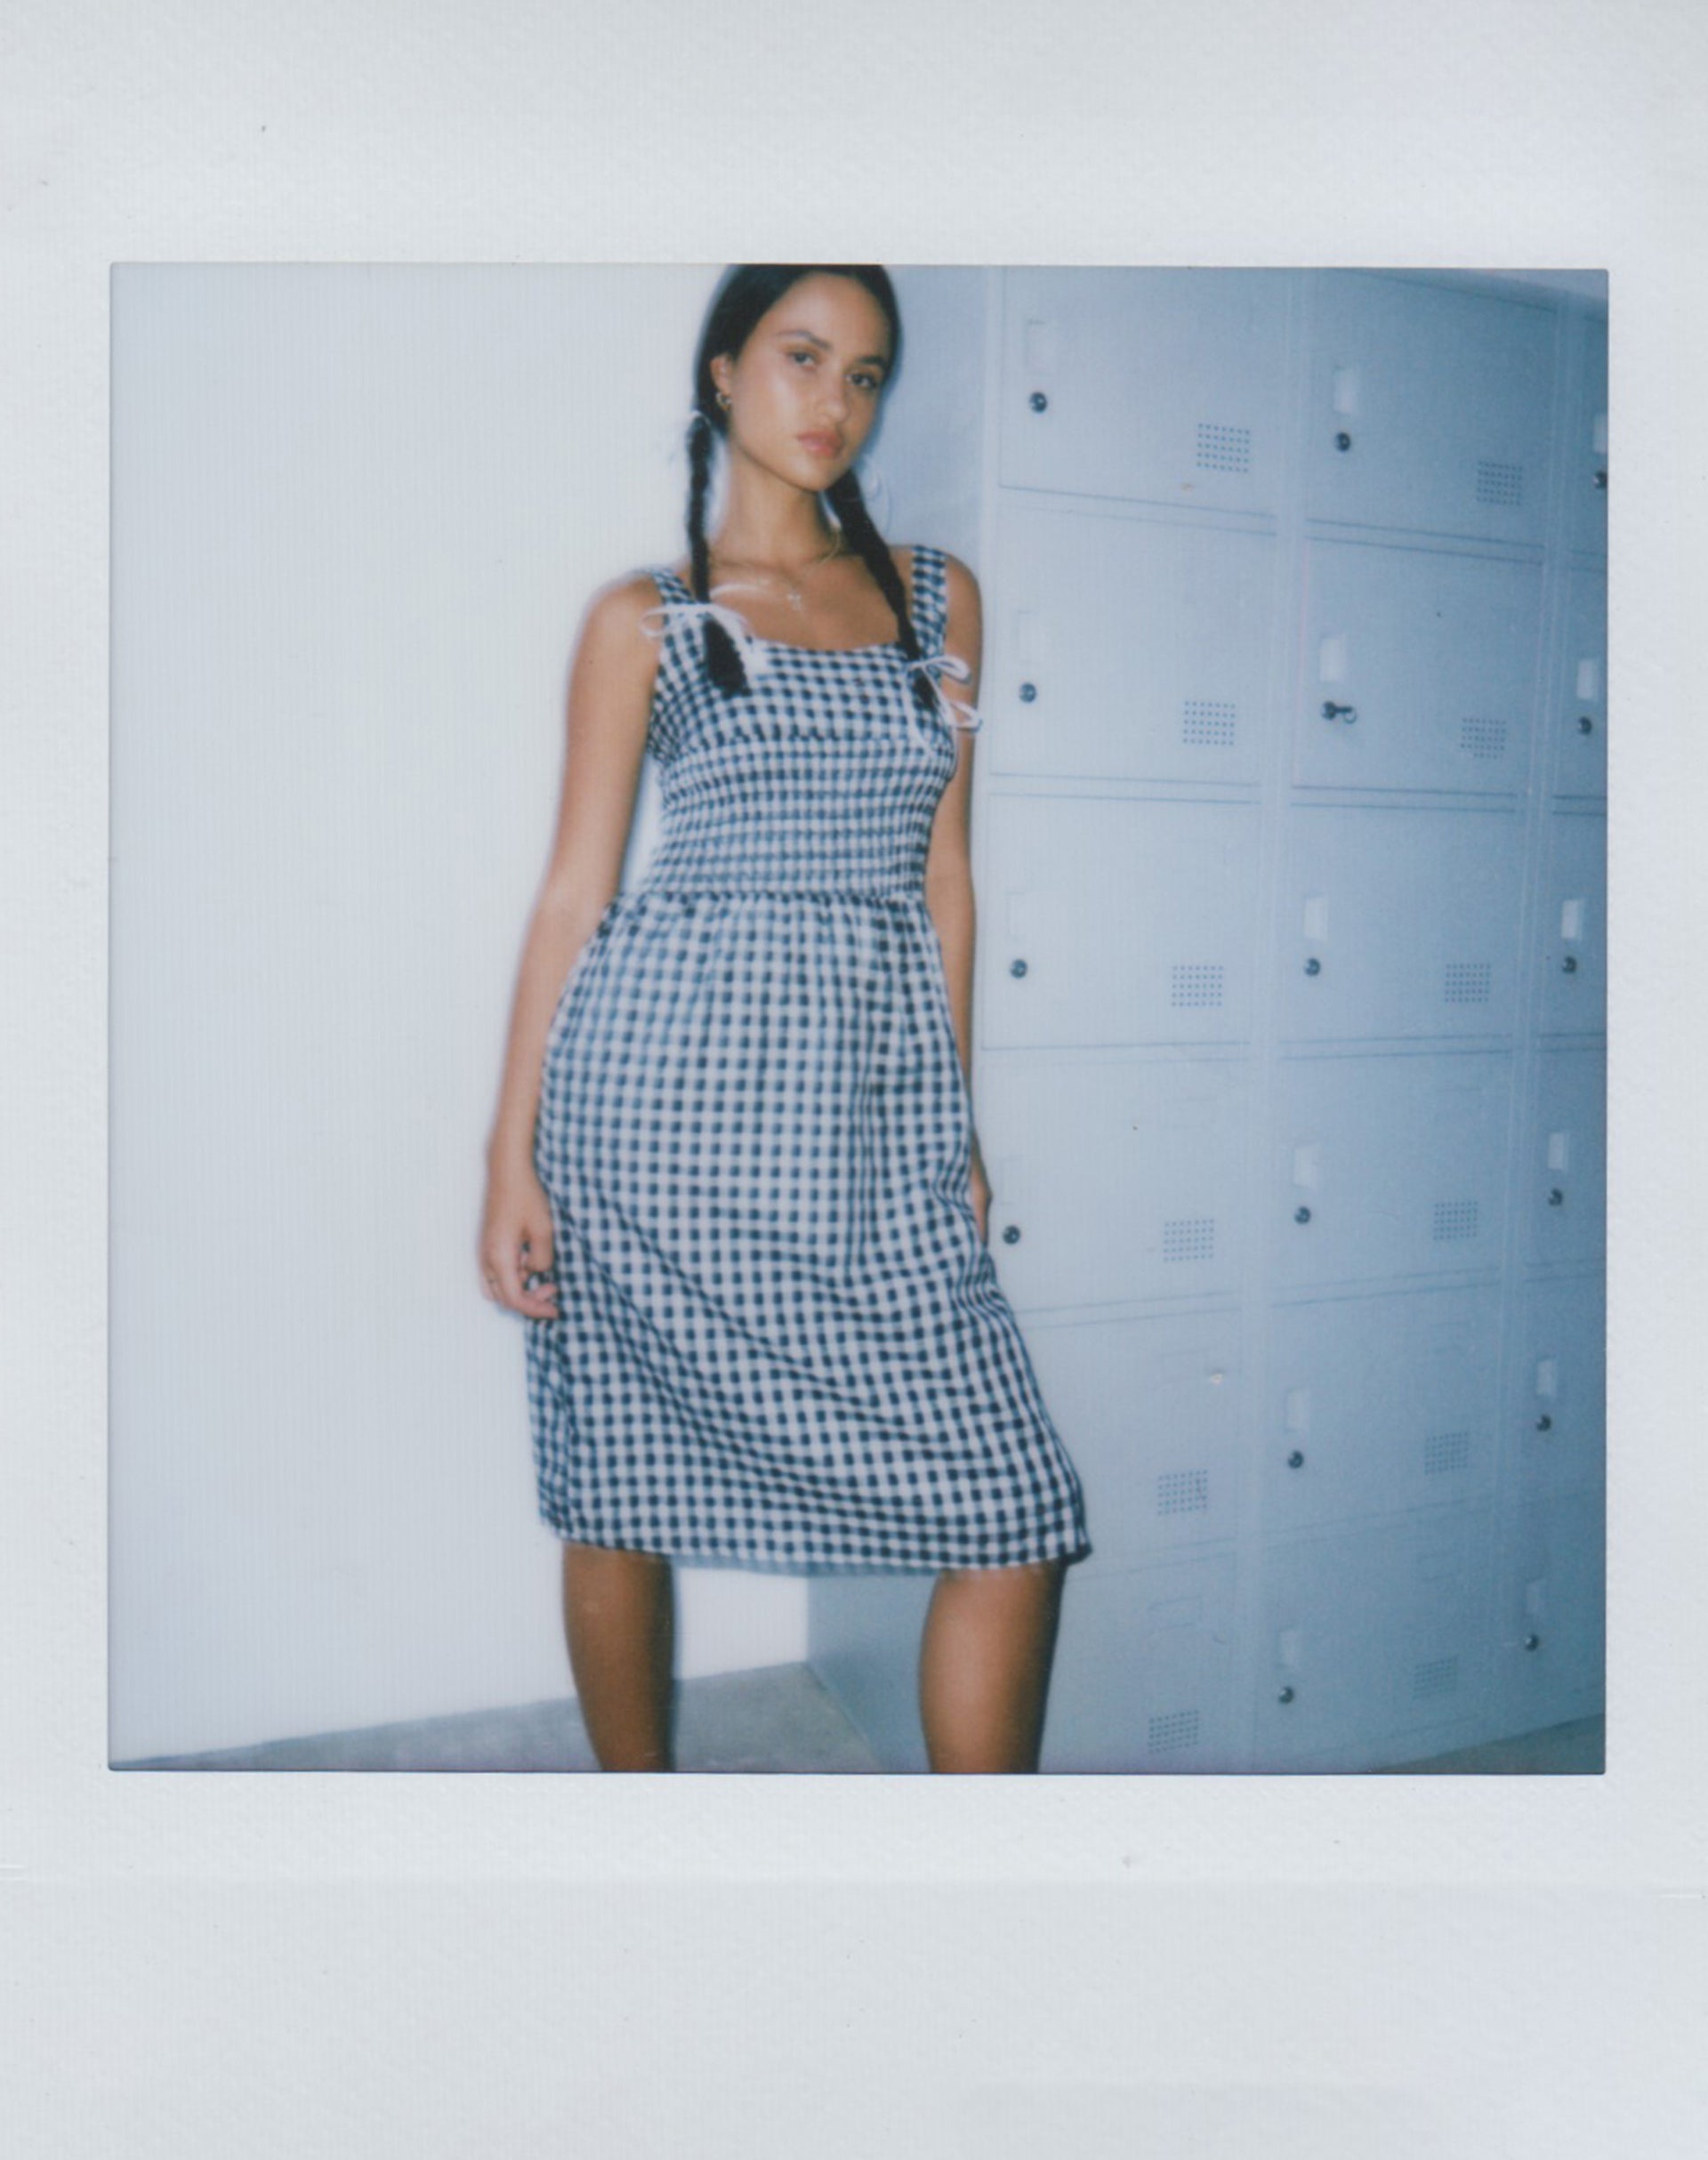 Image of Ambrose Midi Dress in Black and White Gingham